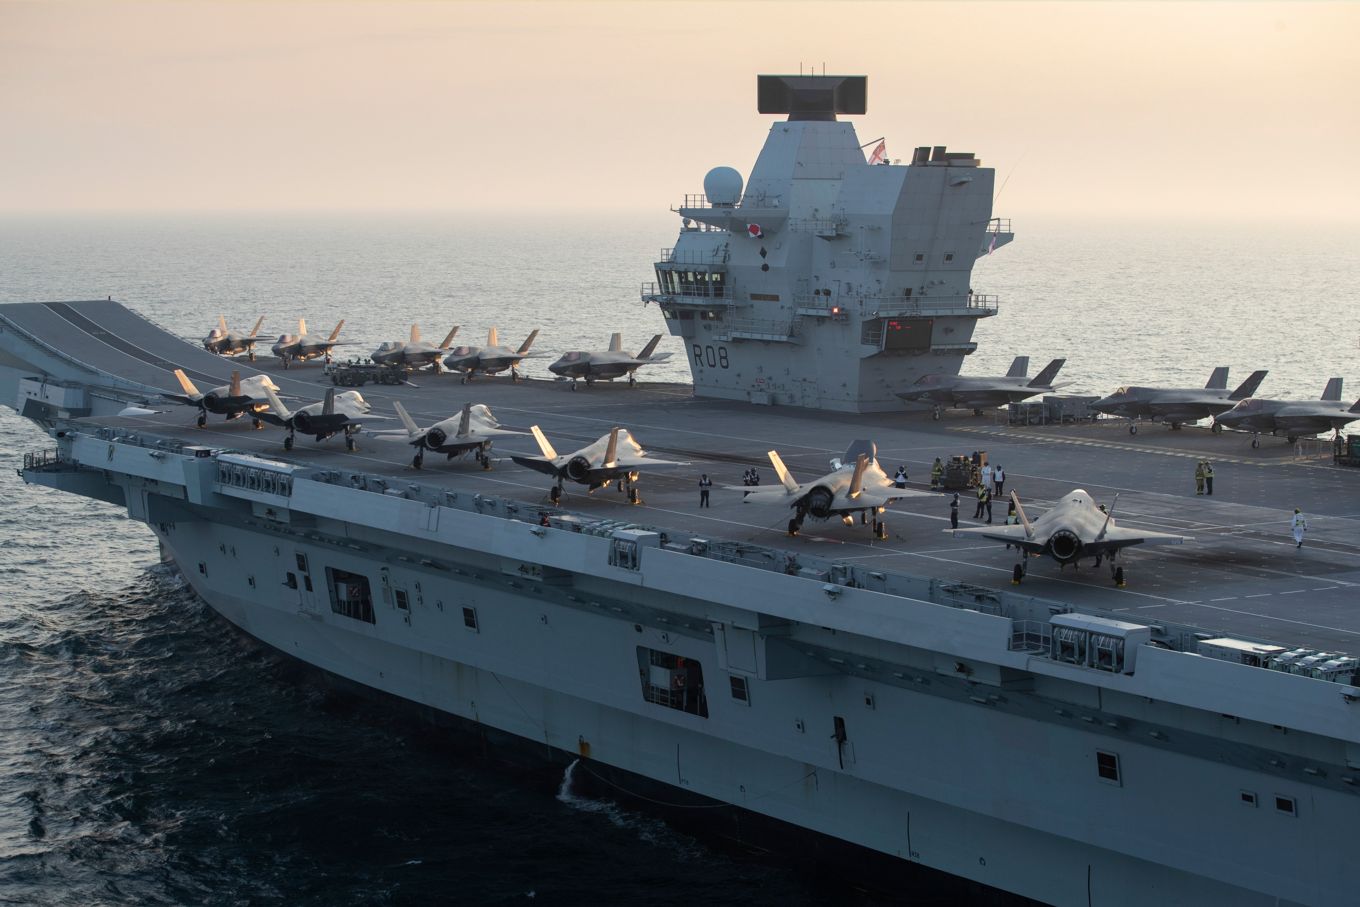 Image shows F35 aircraft on HMS Queen Elizabeth aircraft carrier.